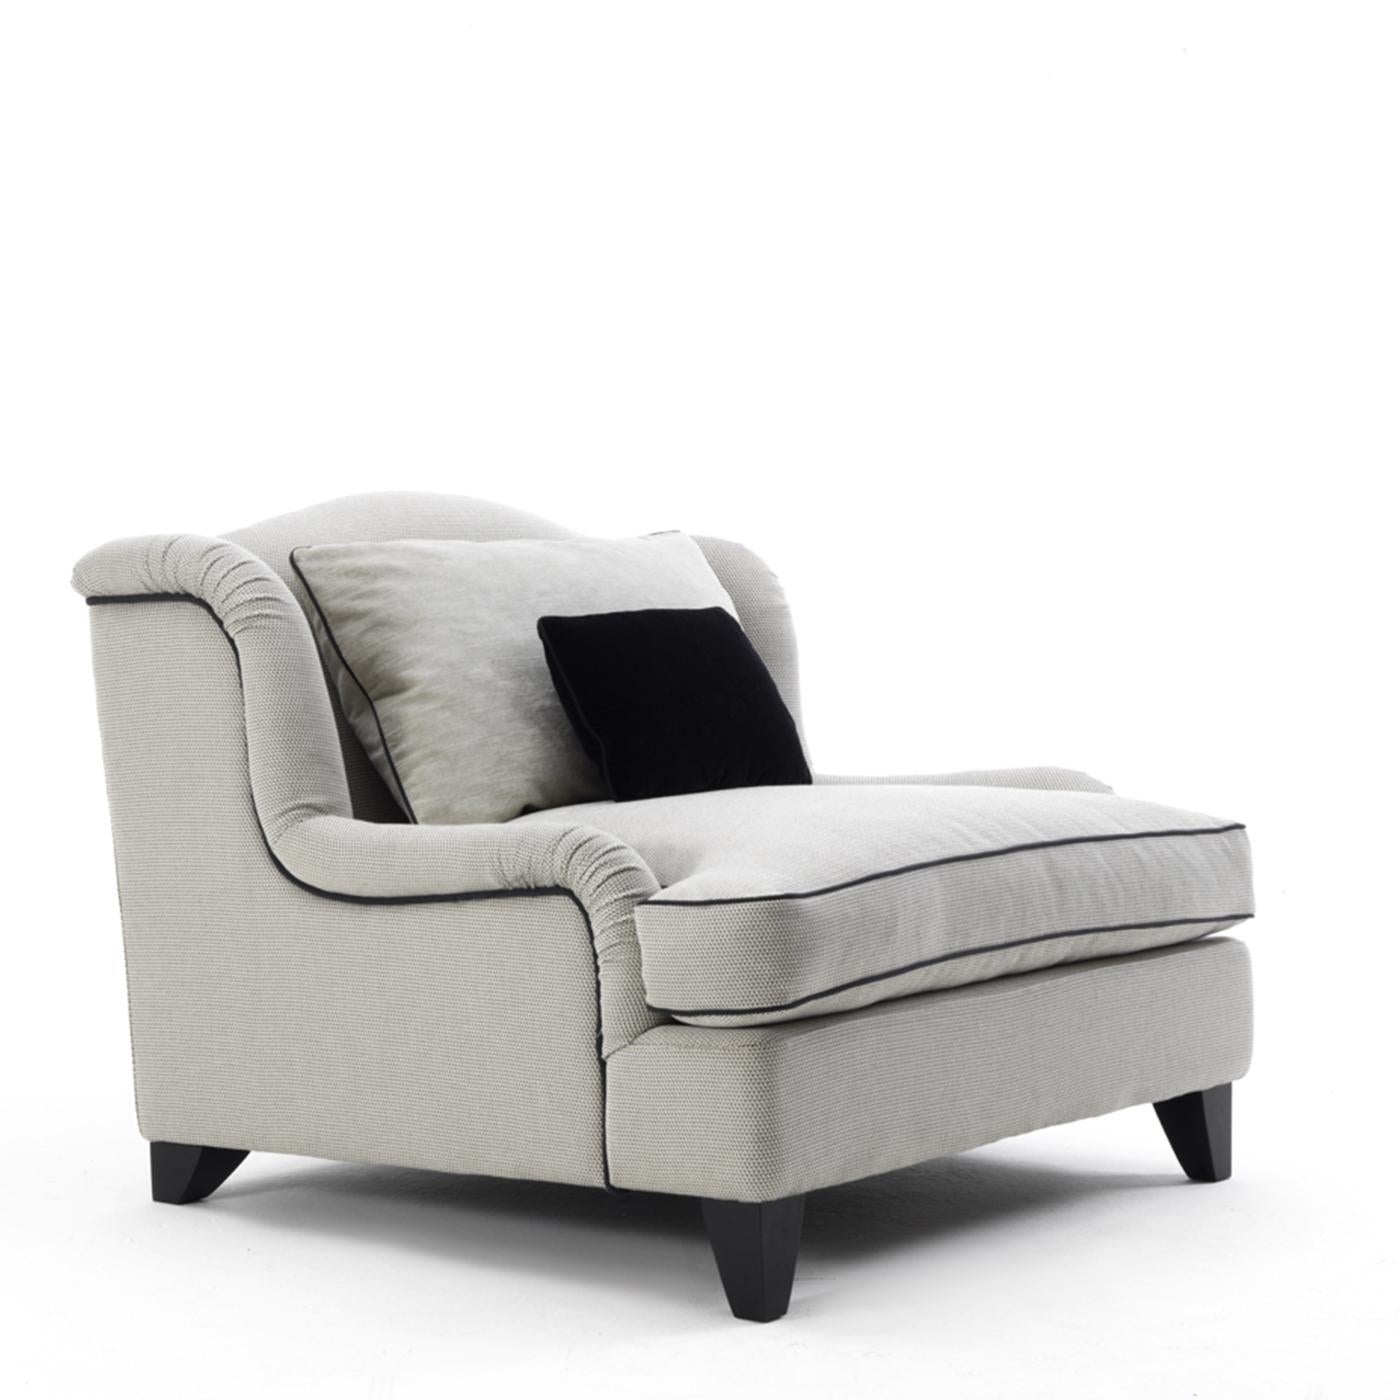 Old-fashioned glamour and exquisite craftsmanship create the ultimate lounging chair, an ideal addition to a classic living room, modern study or bedroom. The solid wood structure comprises feet in beechwood and is accented with the gentle curves of